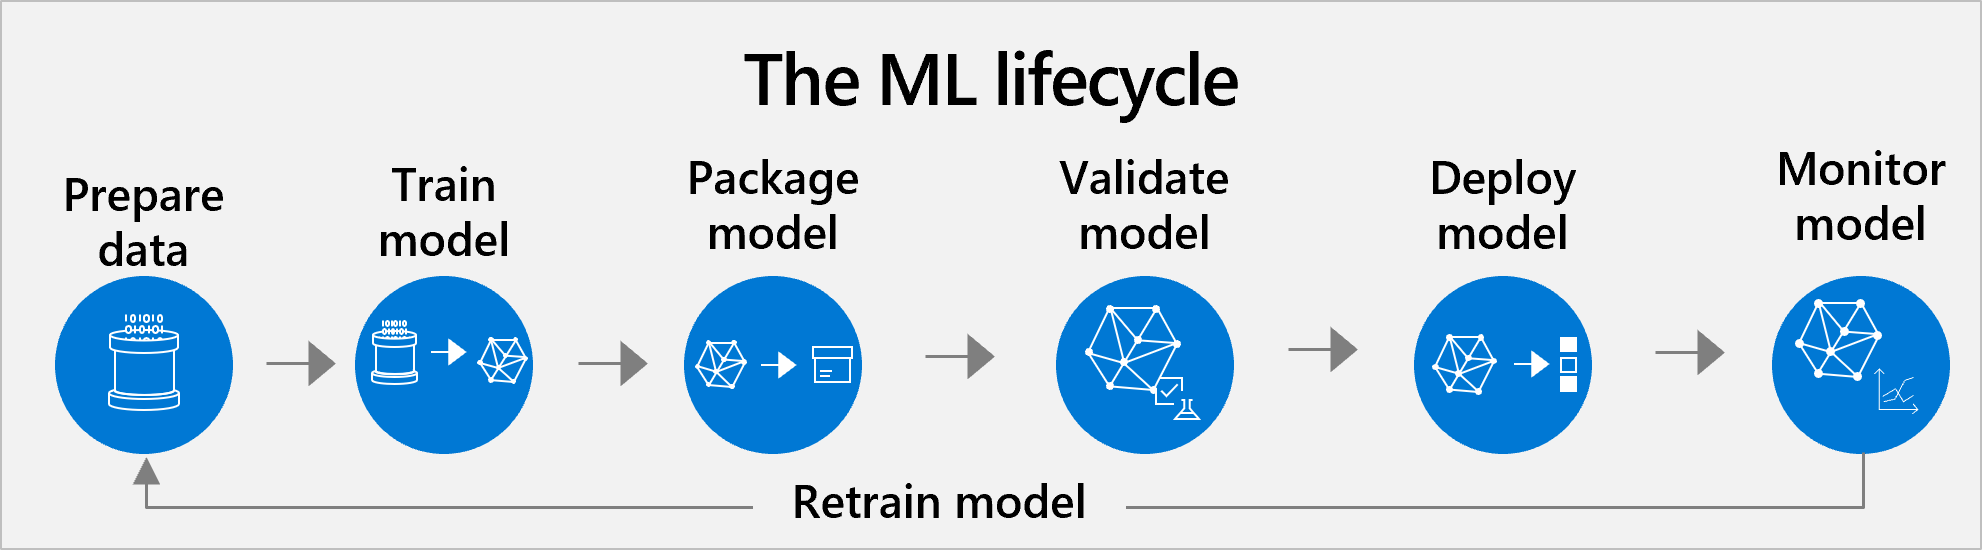 A screenshot of a graph showing the ML lifecycle: prepare data, train model, package model, validate model, deploy mode, monitor model, and retrain model.